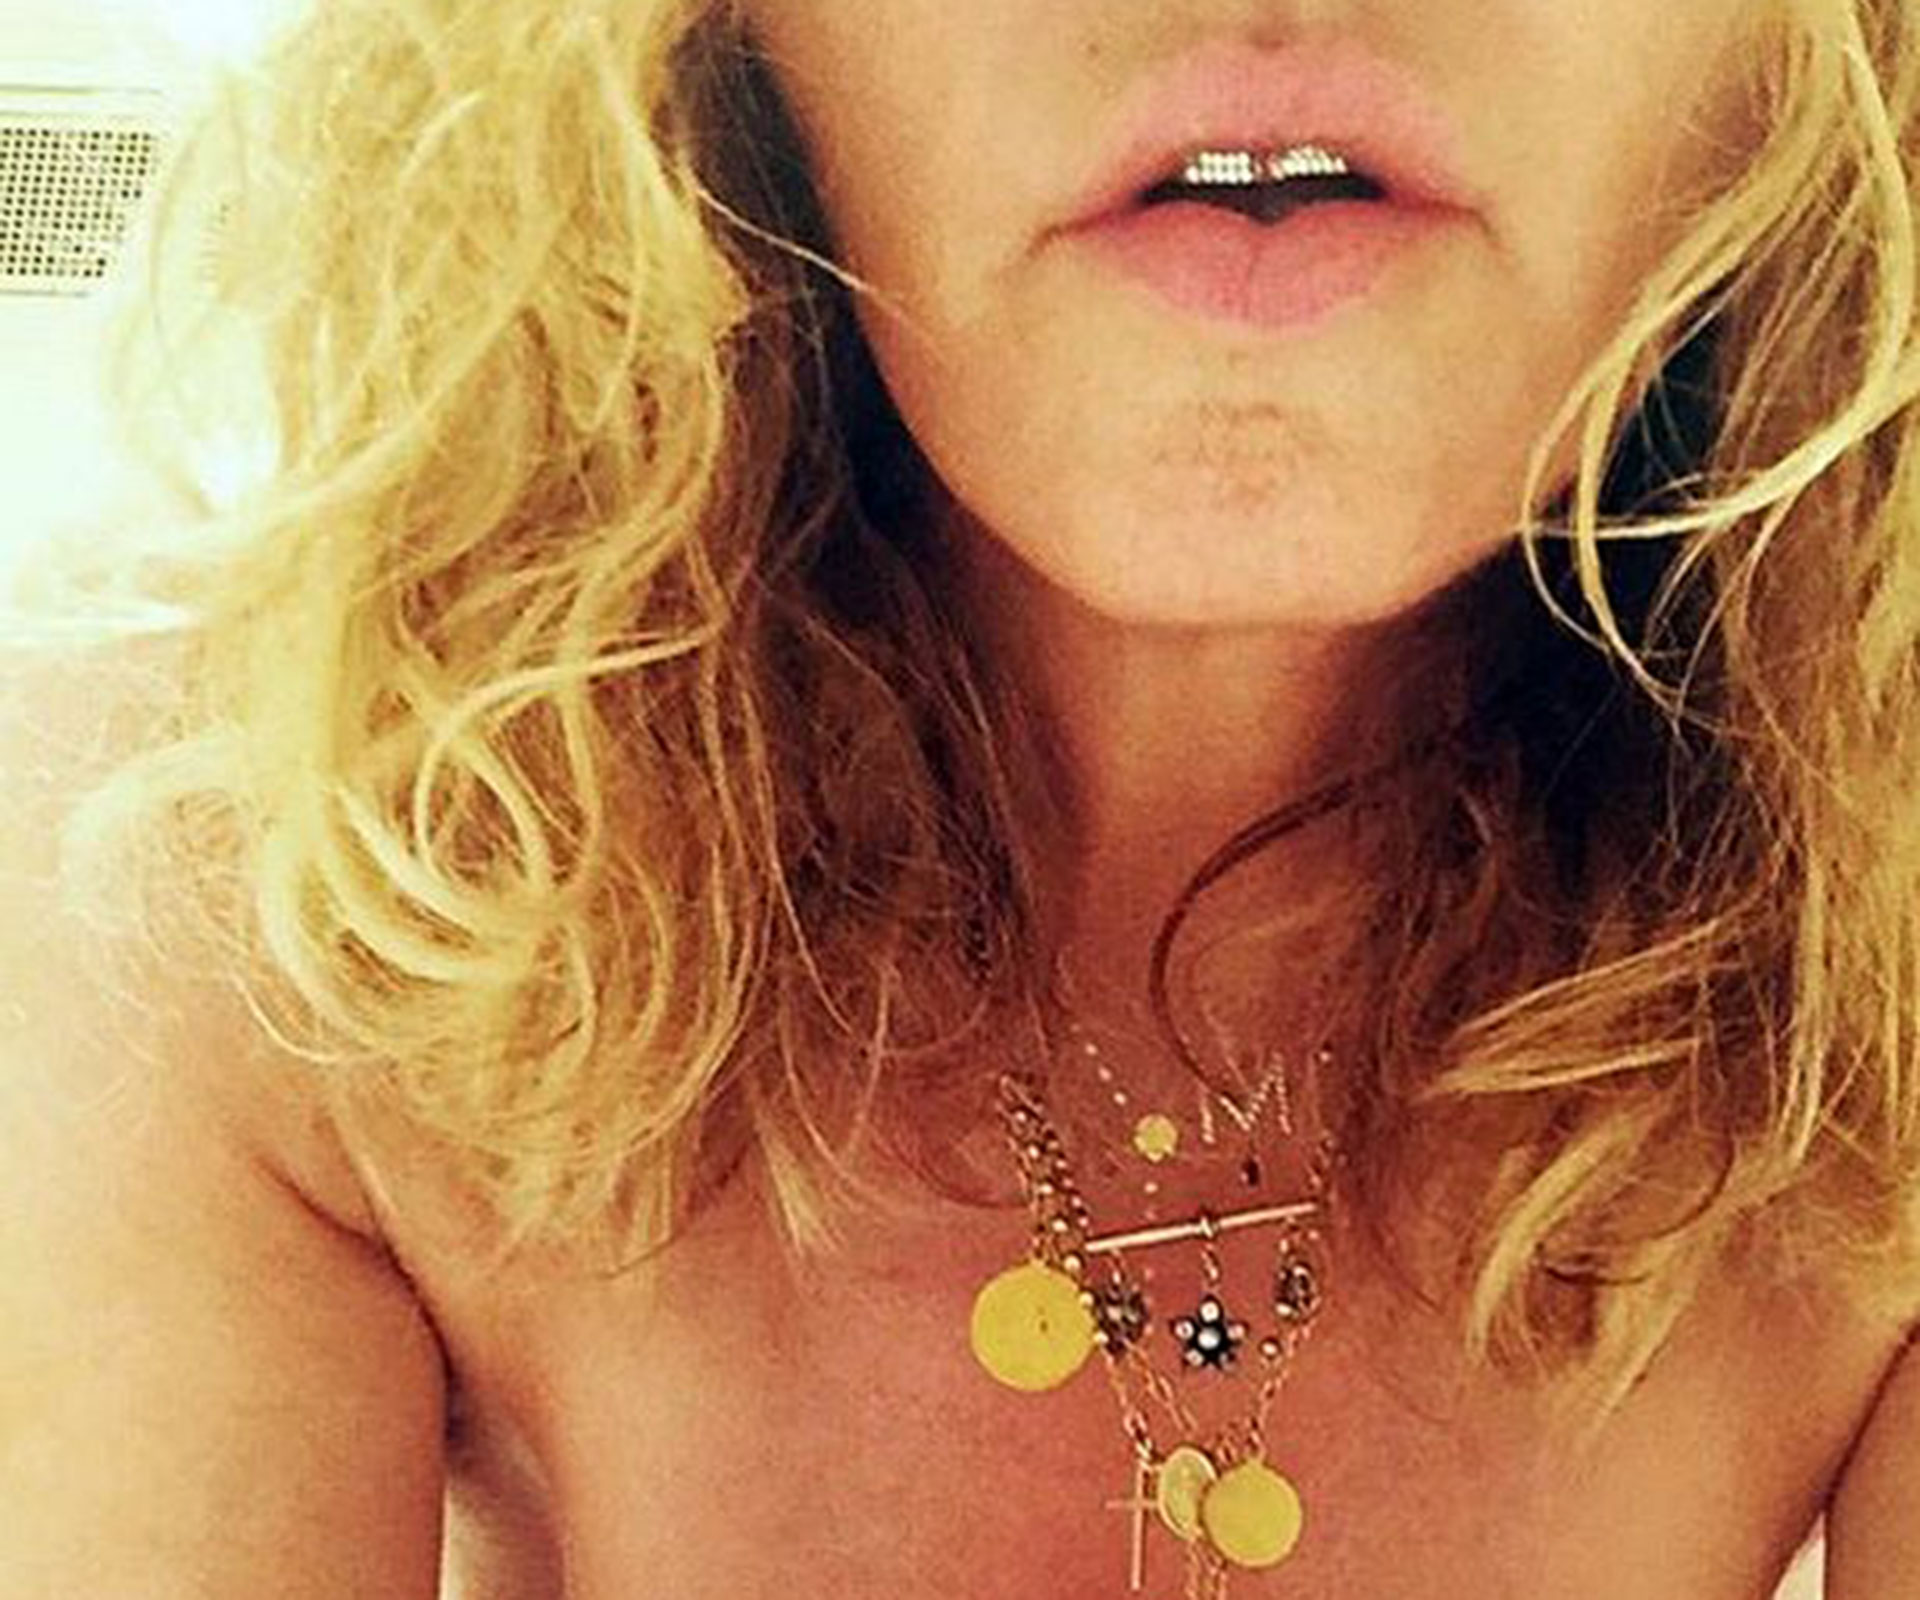 Madonna posts nude photo to encourage Americans to vote